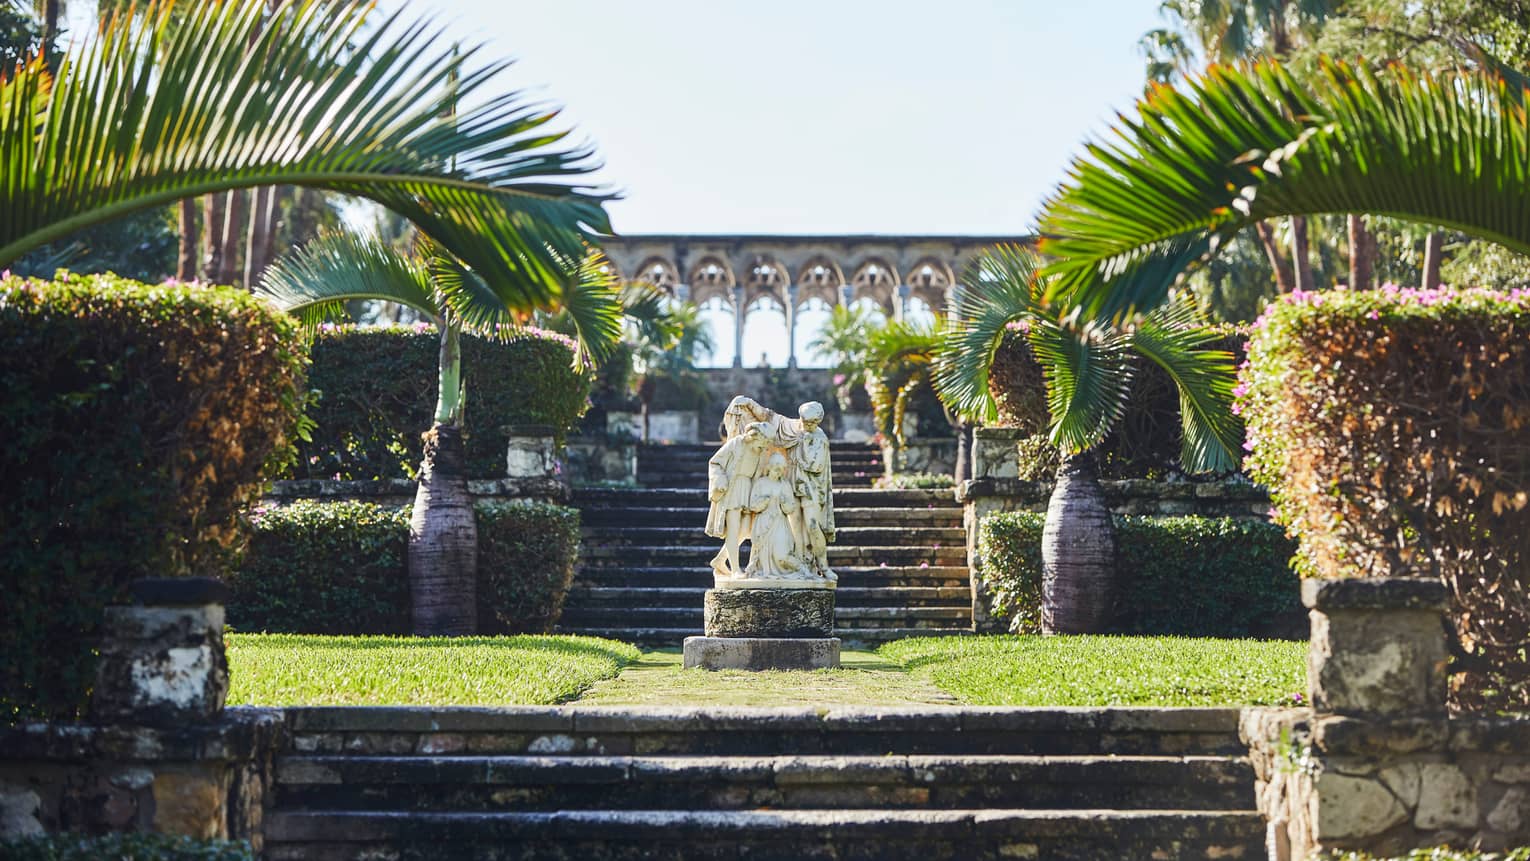 Marble statue in sunny, tropical gardens 